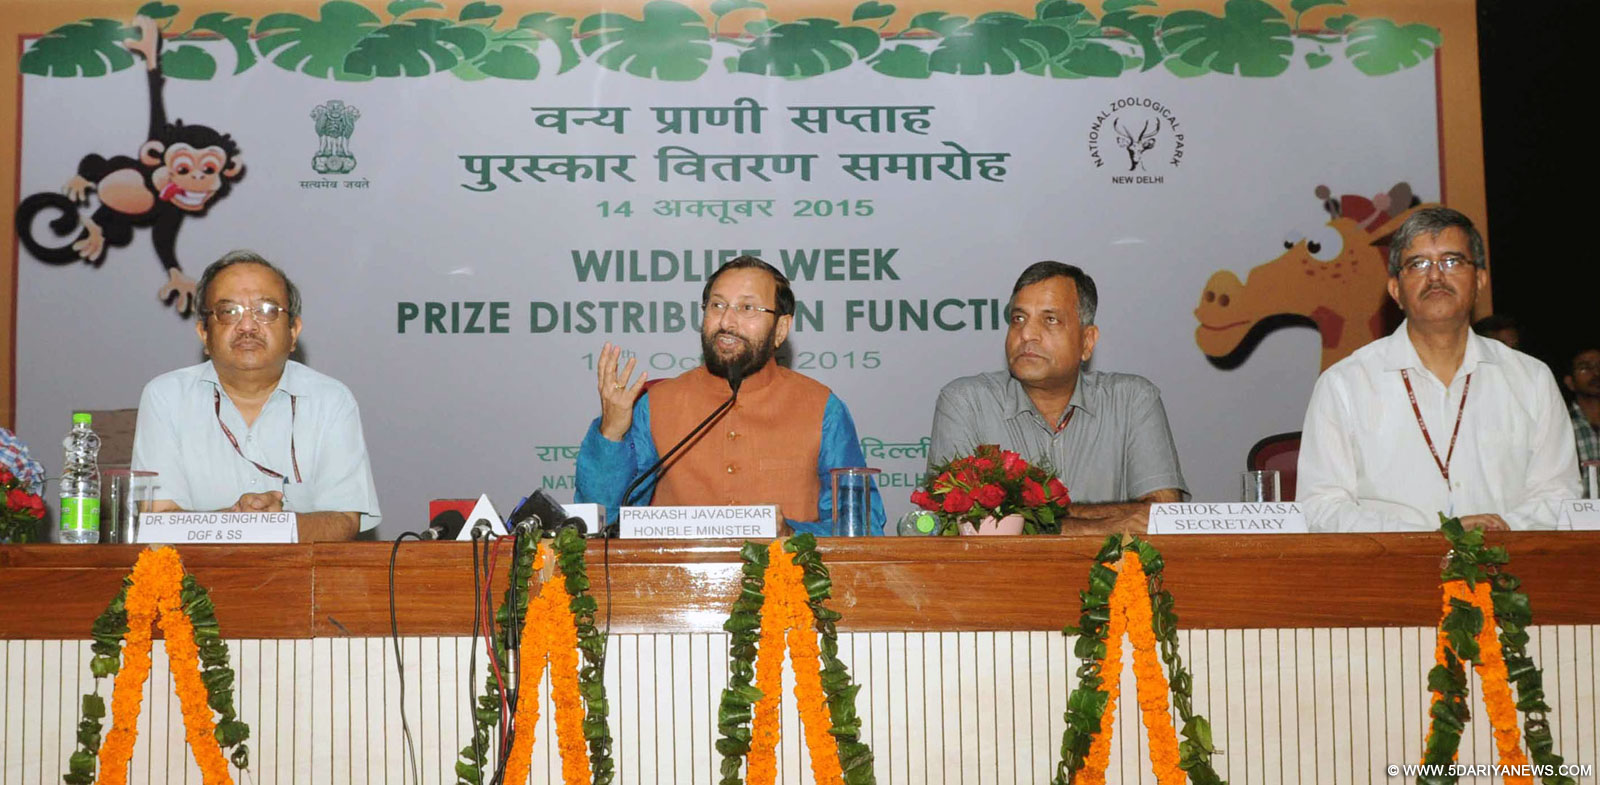 The Minister of State for Environment, Forest and Climate Change (Independent Charge), Shri Prakash Javadekar addressing at the Prize distribution function of Wildlife Week, in New Delhi on October 14, 2015. The Secretary, Ministry of Environment, Forest and Climate Change, Shri Ashok Lavasa and other dignitaries are also seen.